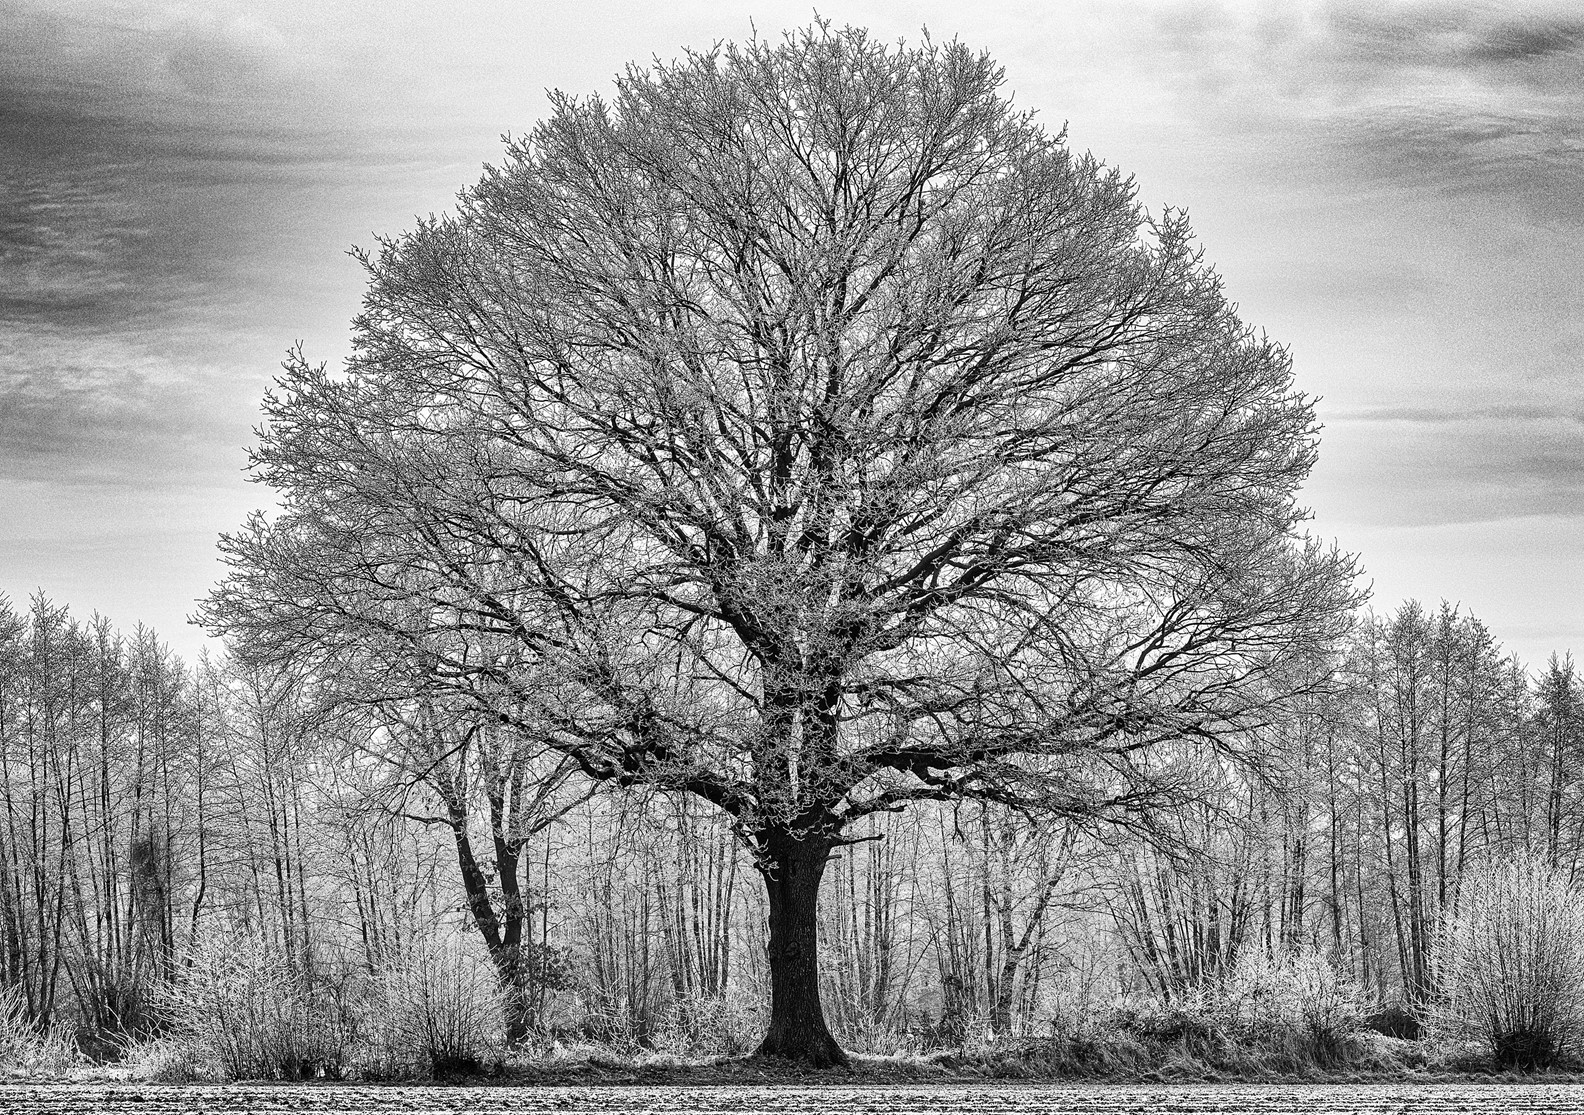 Photograph of a beautiful tree in Germany.